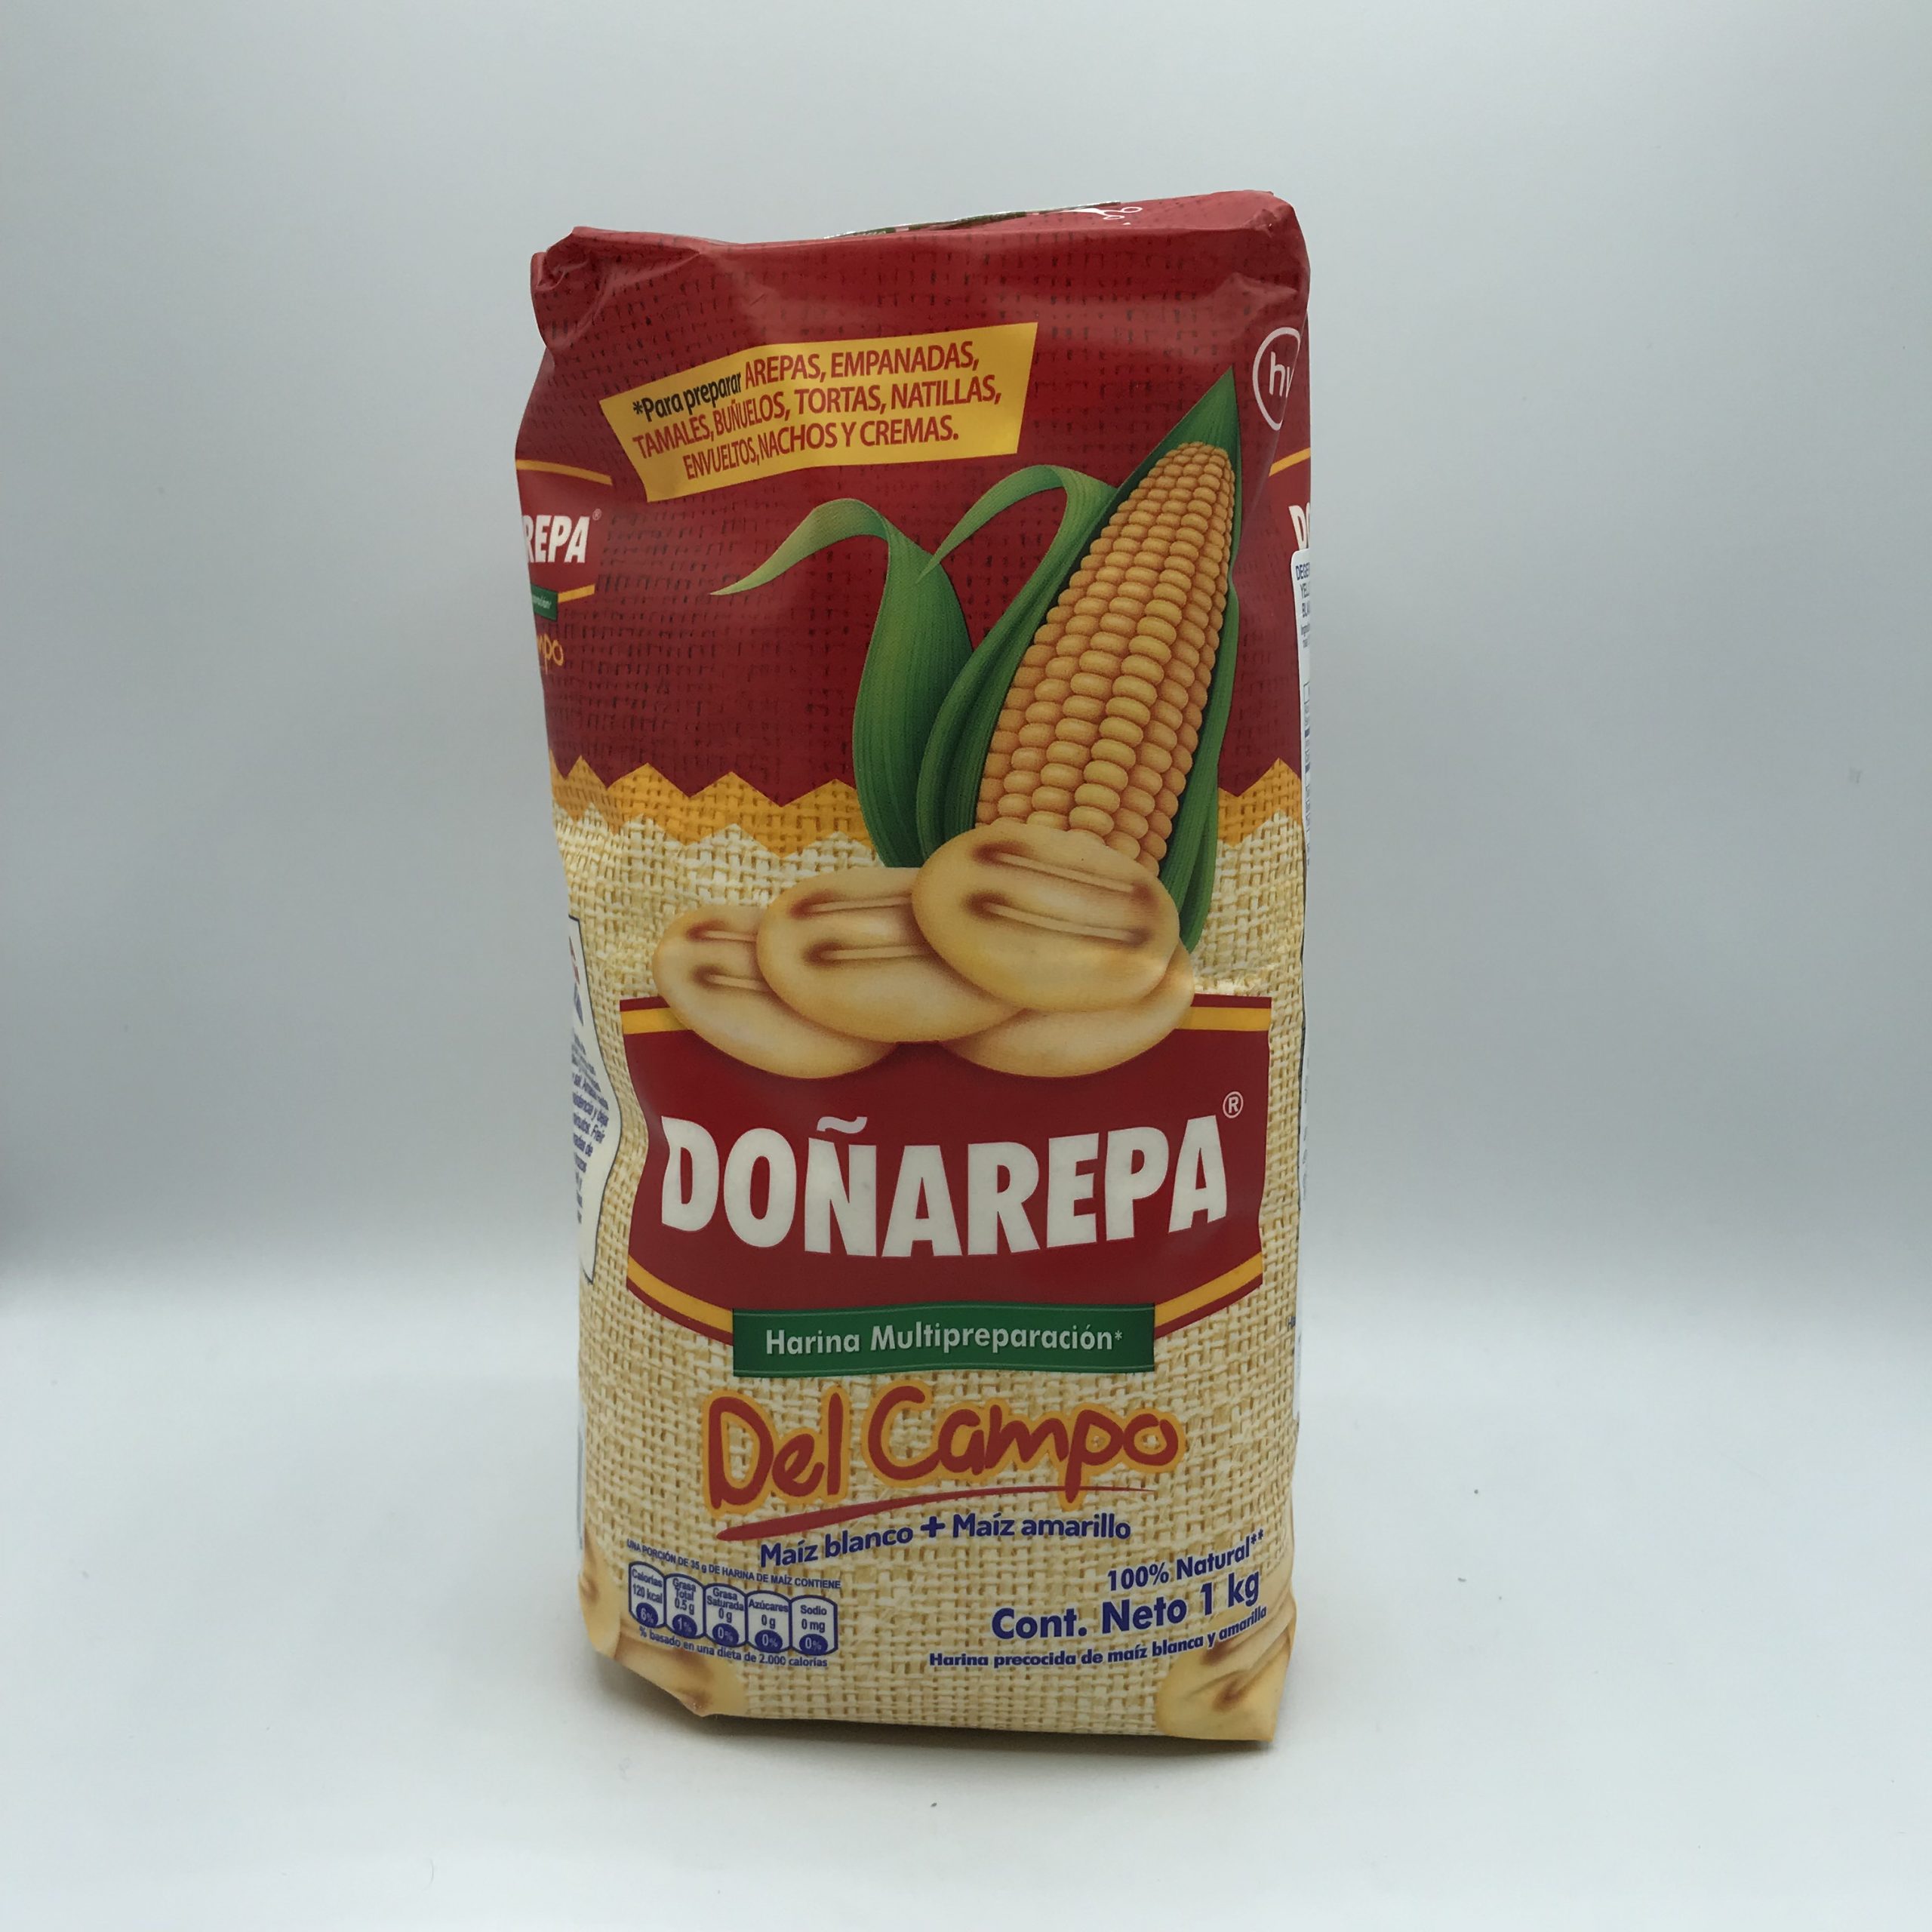 Doñarepa Del Campo 1kg - America Latina Grocery and Eatery